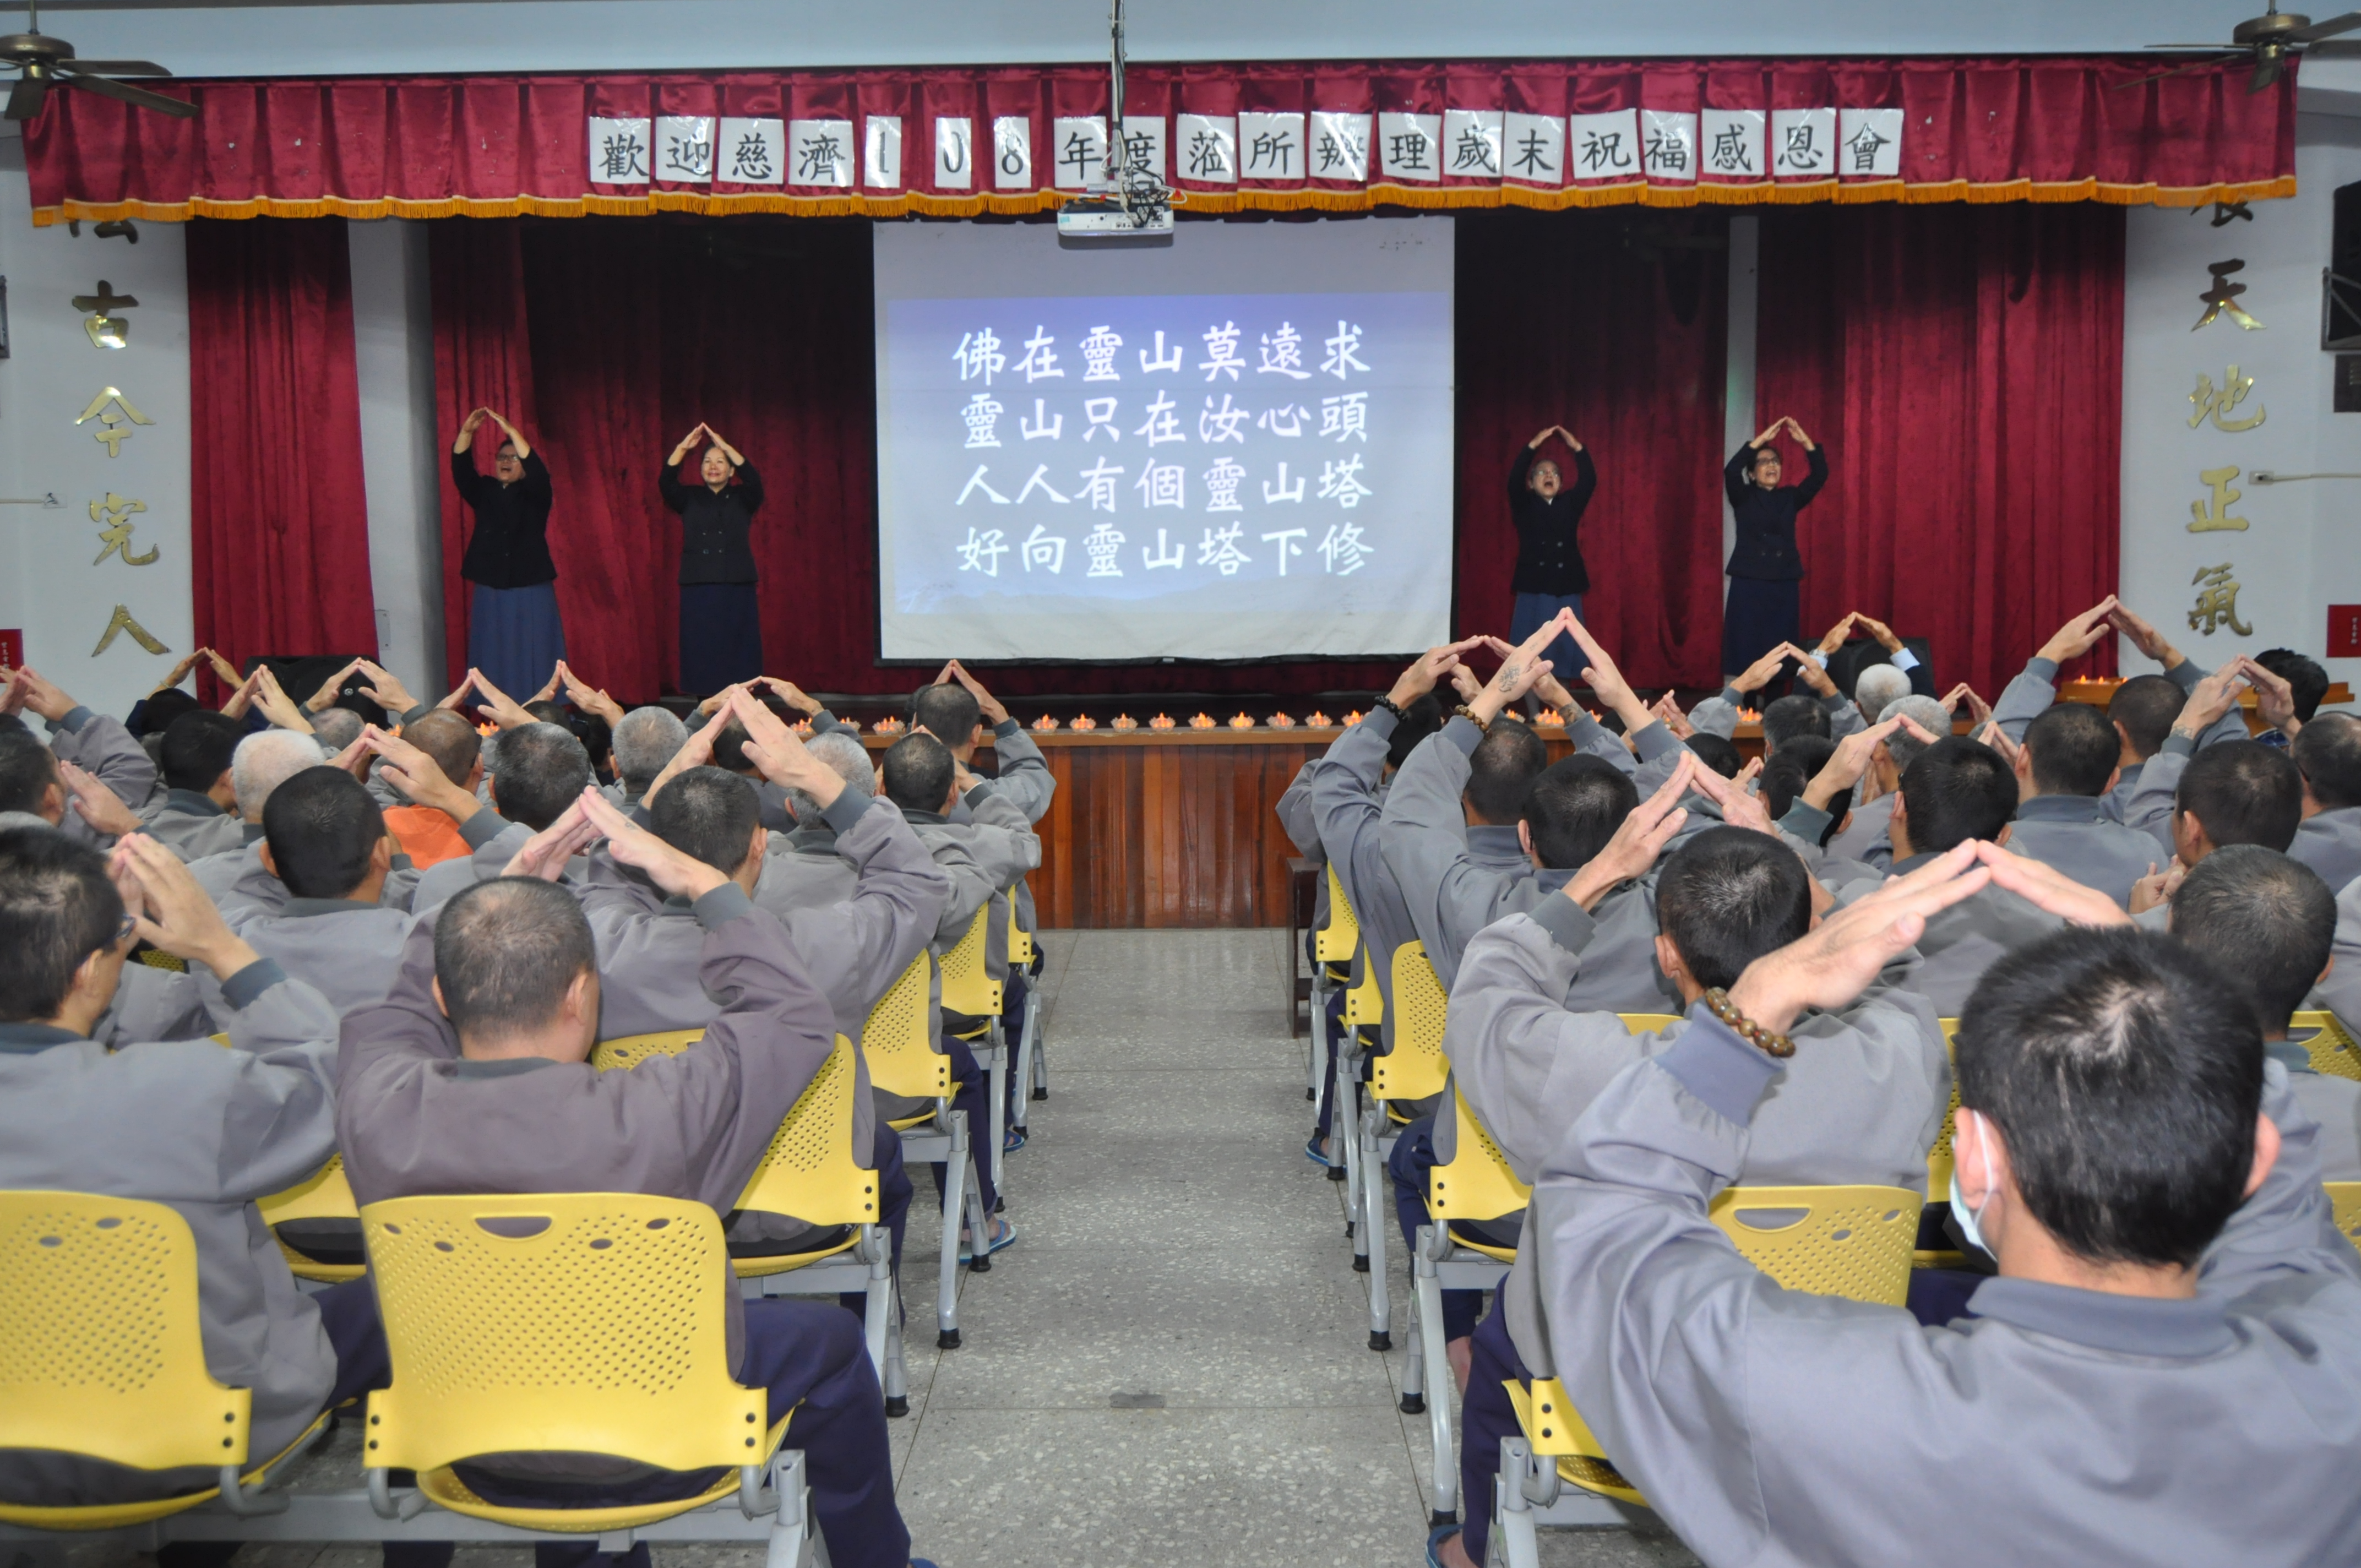 The activity of Sign Language which was demonstrated by Tzu Chi volunteer.